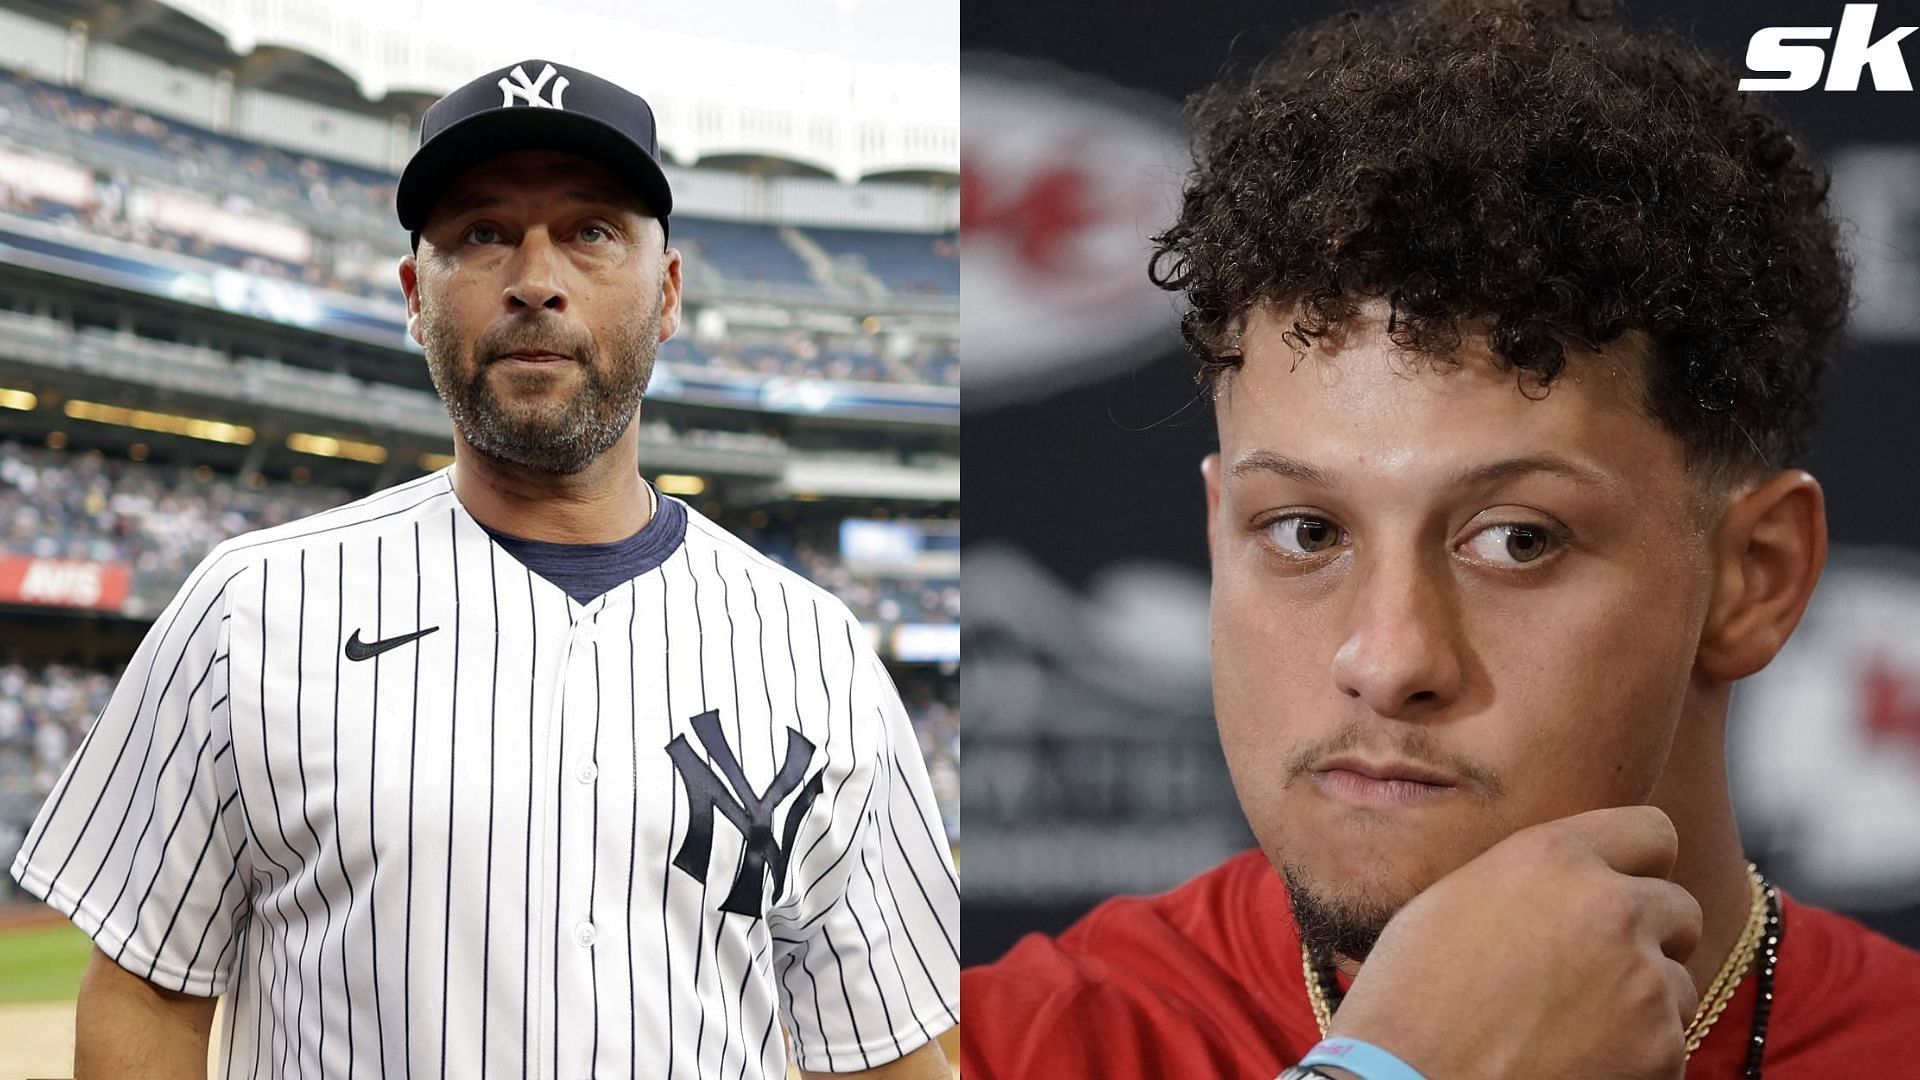 IN PHOTOS: Patrick Mahomes presents Yankees legend Derek Jeter with archived photo of the pair on the baseball field 